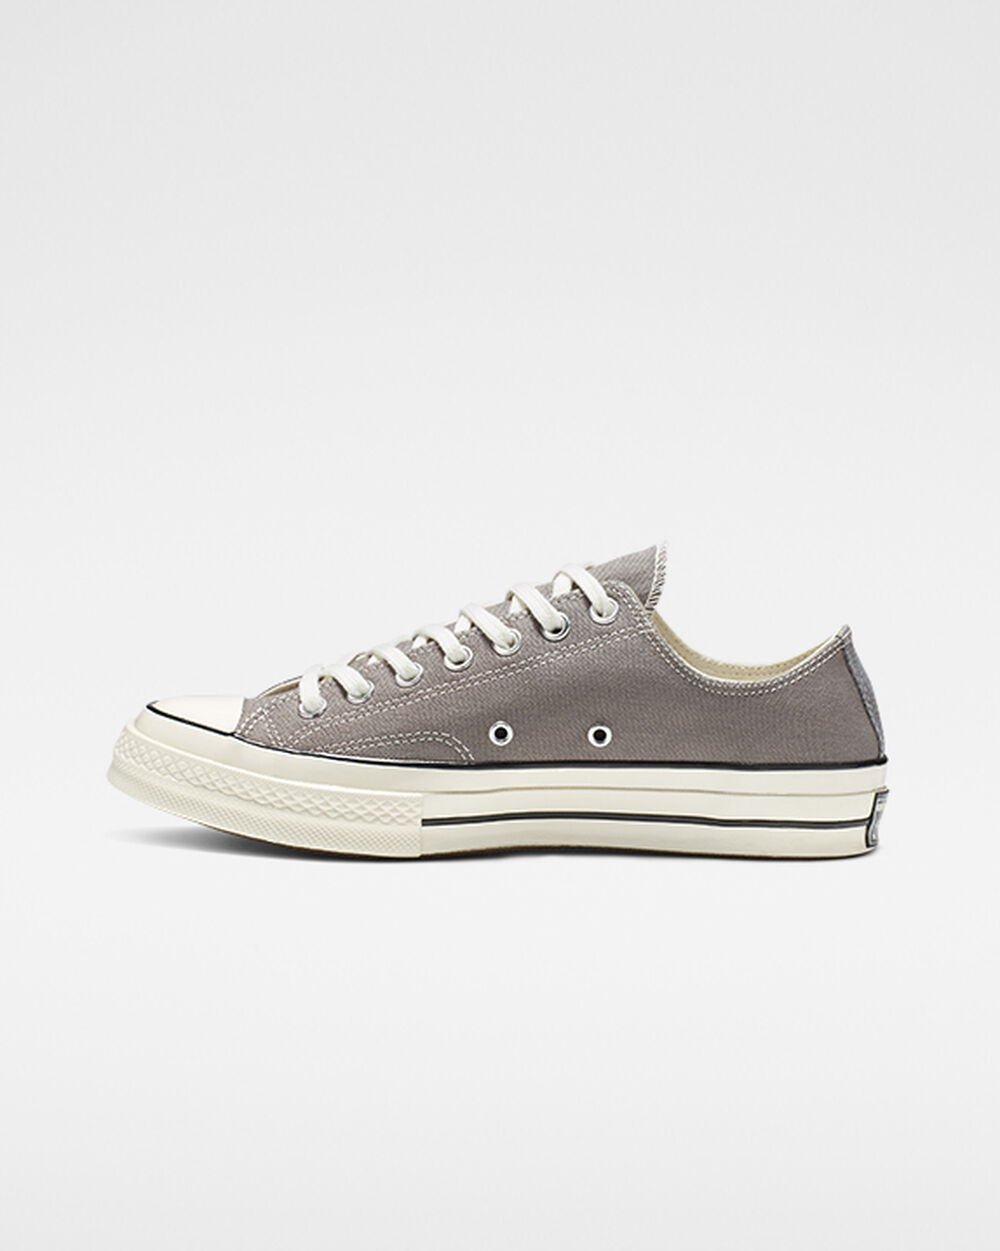 Tenis Converse Chuck 70 Mujer Grises Blancos | Mexico-263176